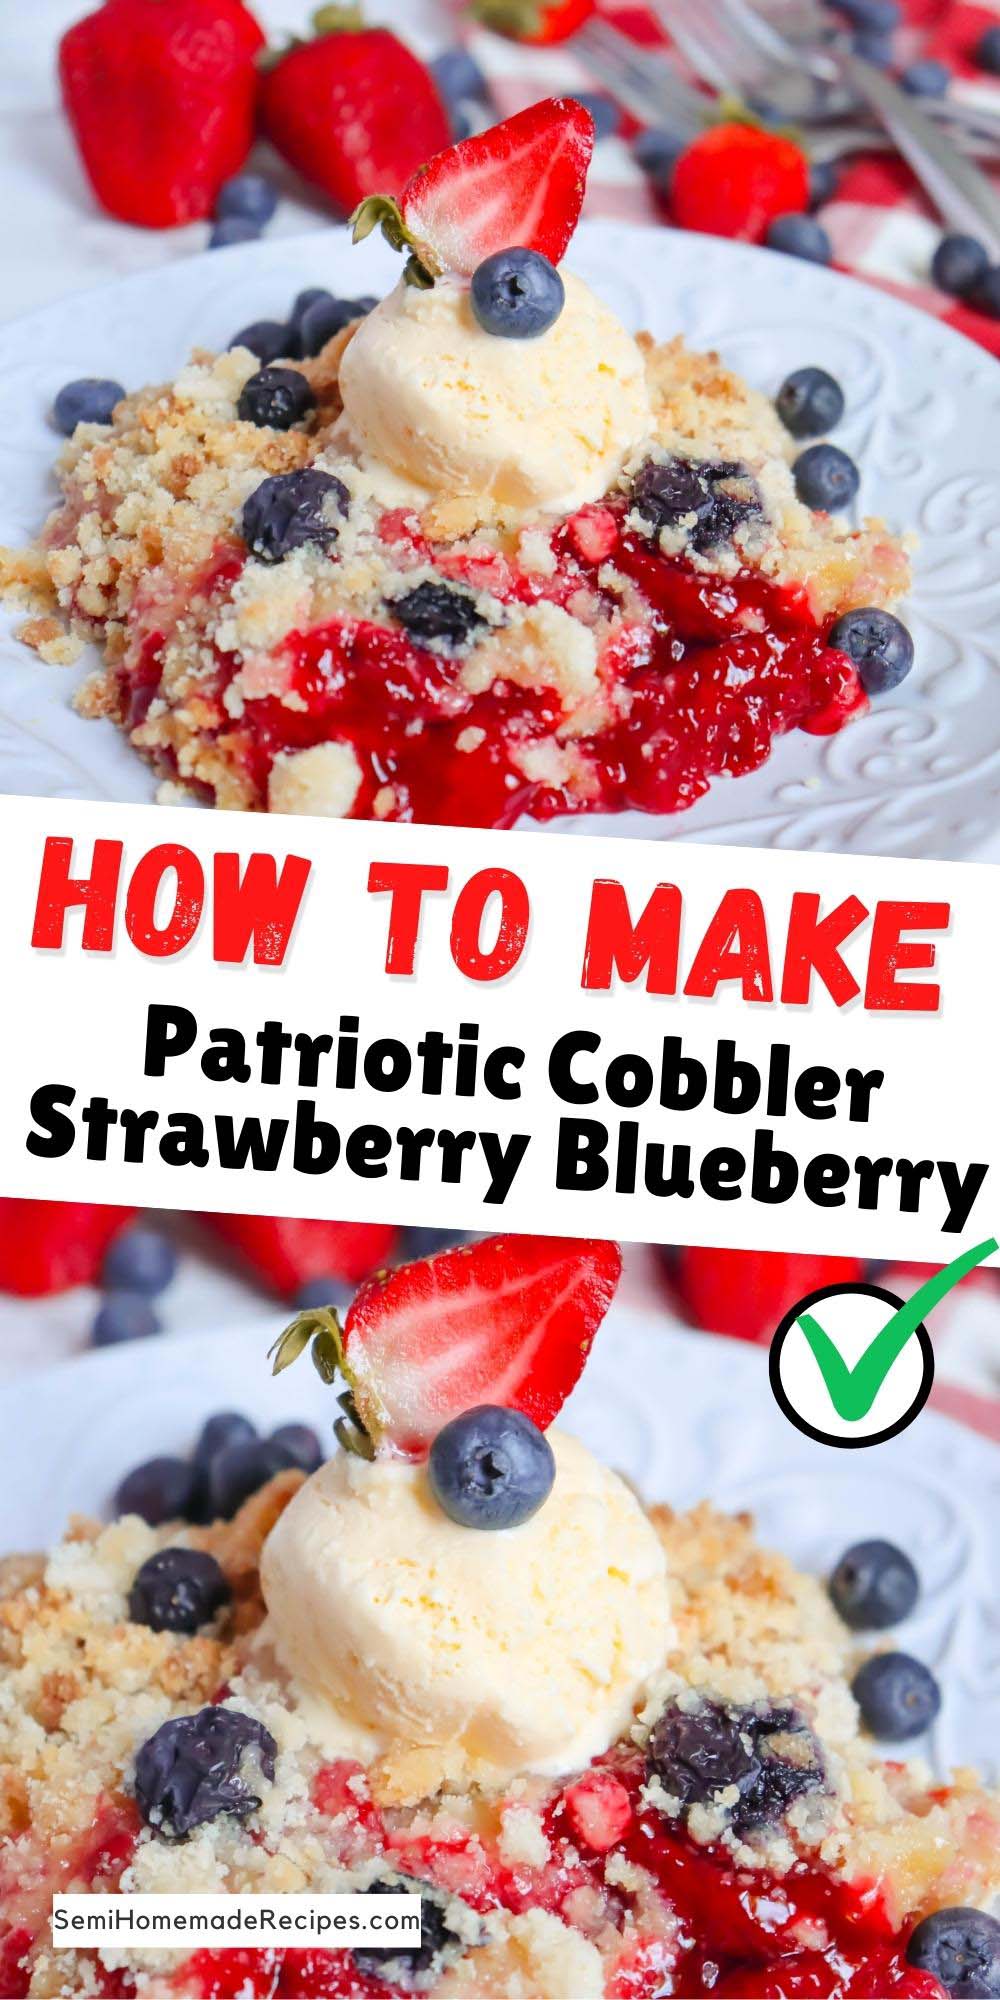 This easy Patriotic Cobbler screams summer with this strawberries and blueberries! Strawberry Pie filling is topped with a cake crumble topping, dotted with fresh blueberries, baked and then served with fresh blueberries, fresh summer strawberries and vanilla ice cream.